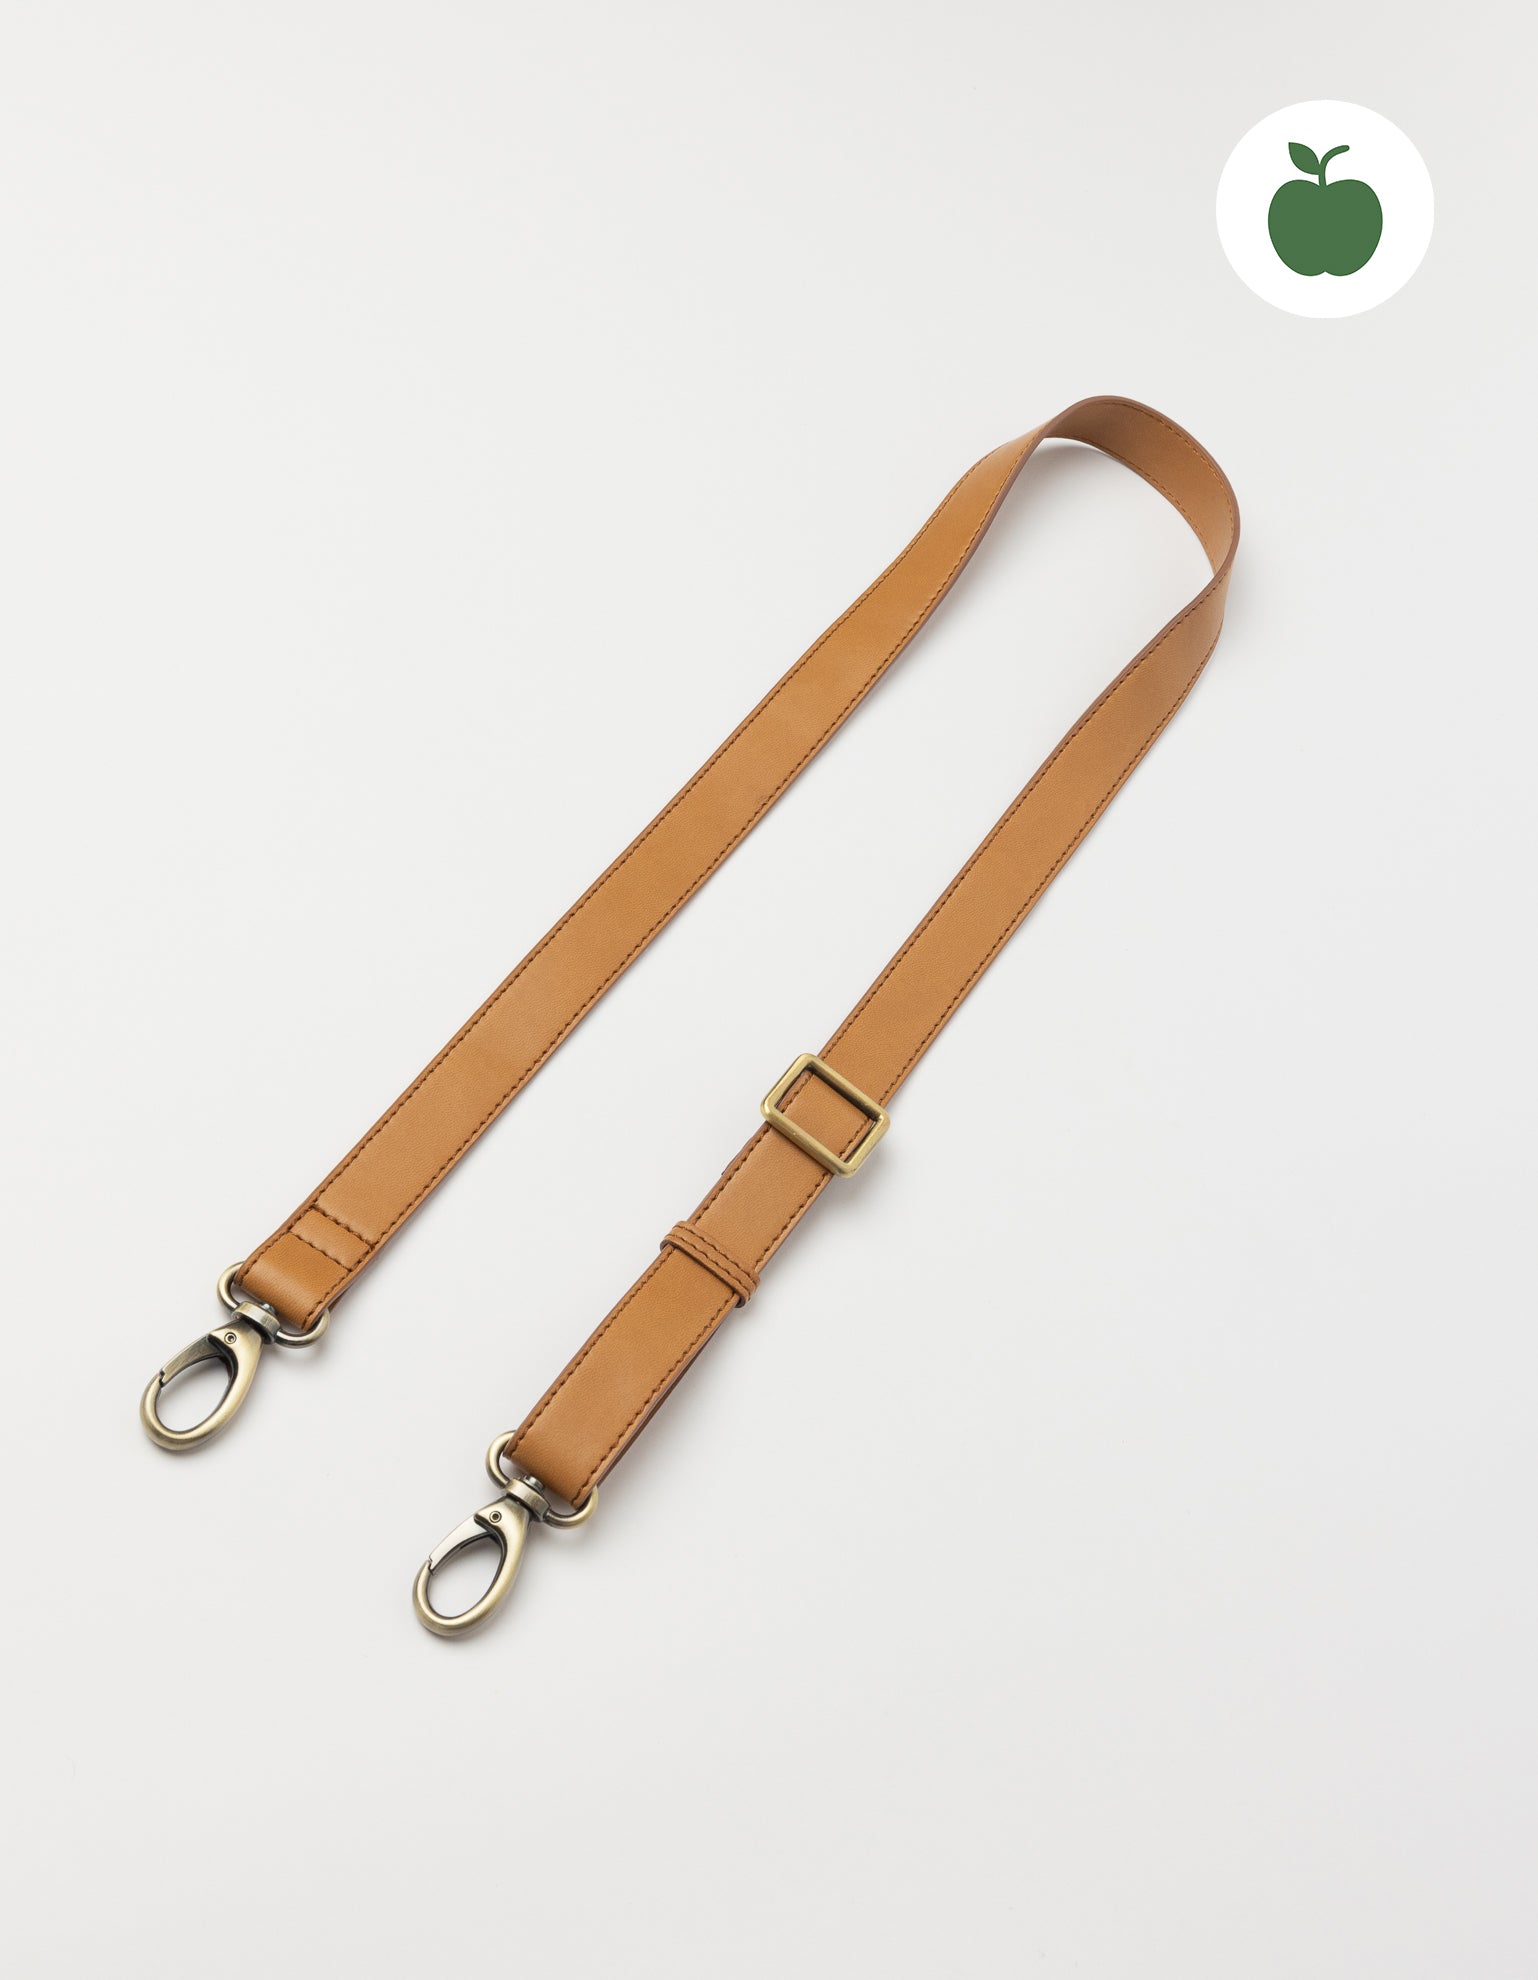 Bum Bag Strap in cognac apple leather. Front product image.